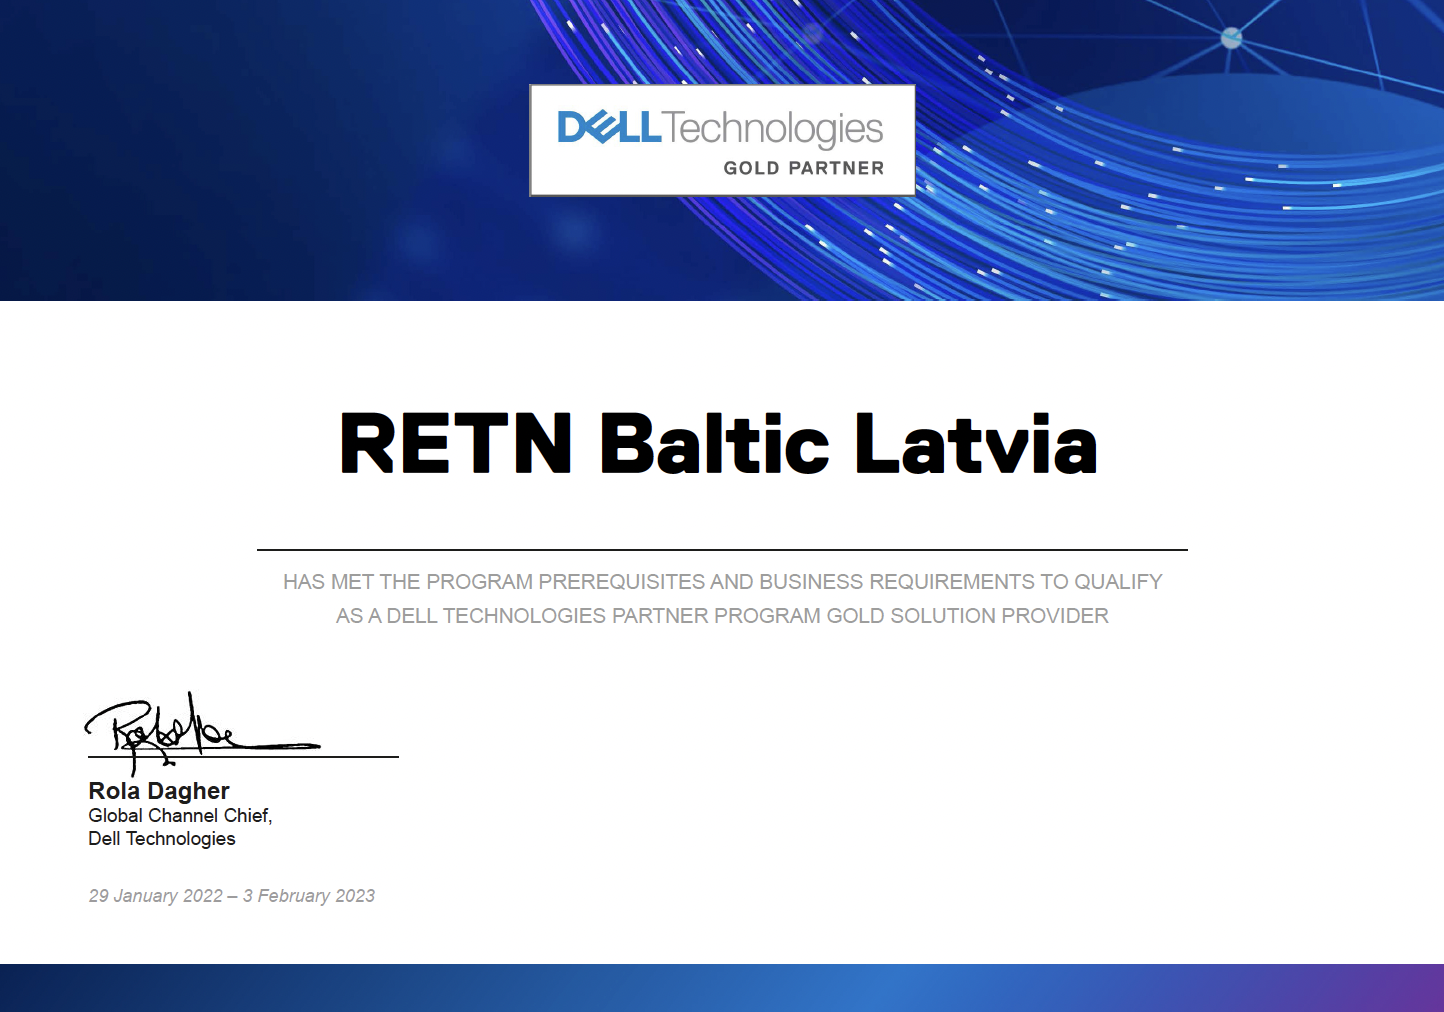 RETN Baltic is qualified as a DELL Technologies partner program Gold solution provider